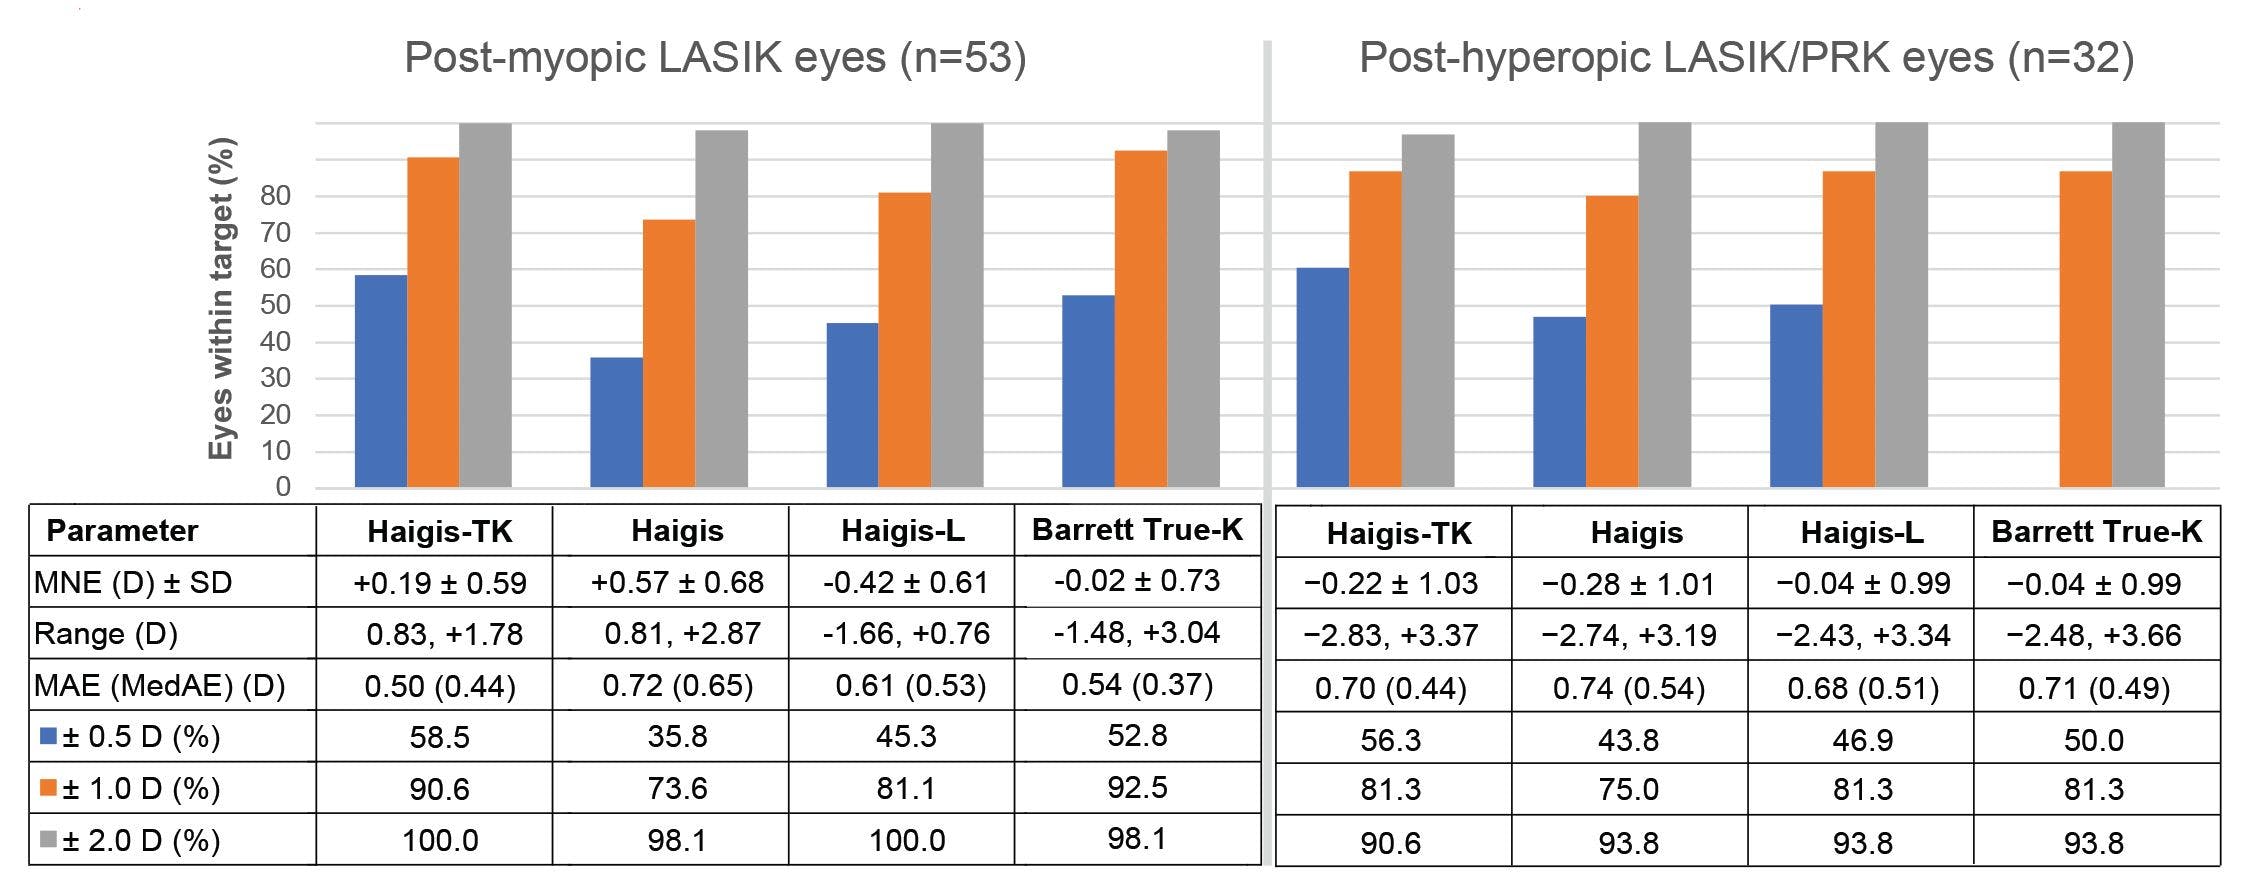 Figure 3 is a chart which shows the proportion of post-excimer laser surgery eyes with mean absolute errors of 0.5, 1.0 and 2.0 D achieved with different IOL power calculation methods.